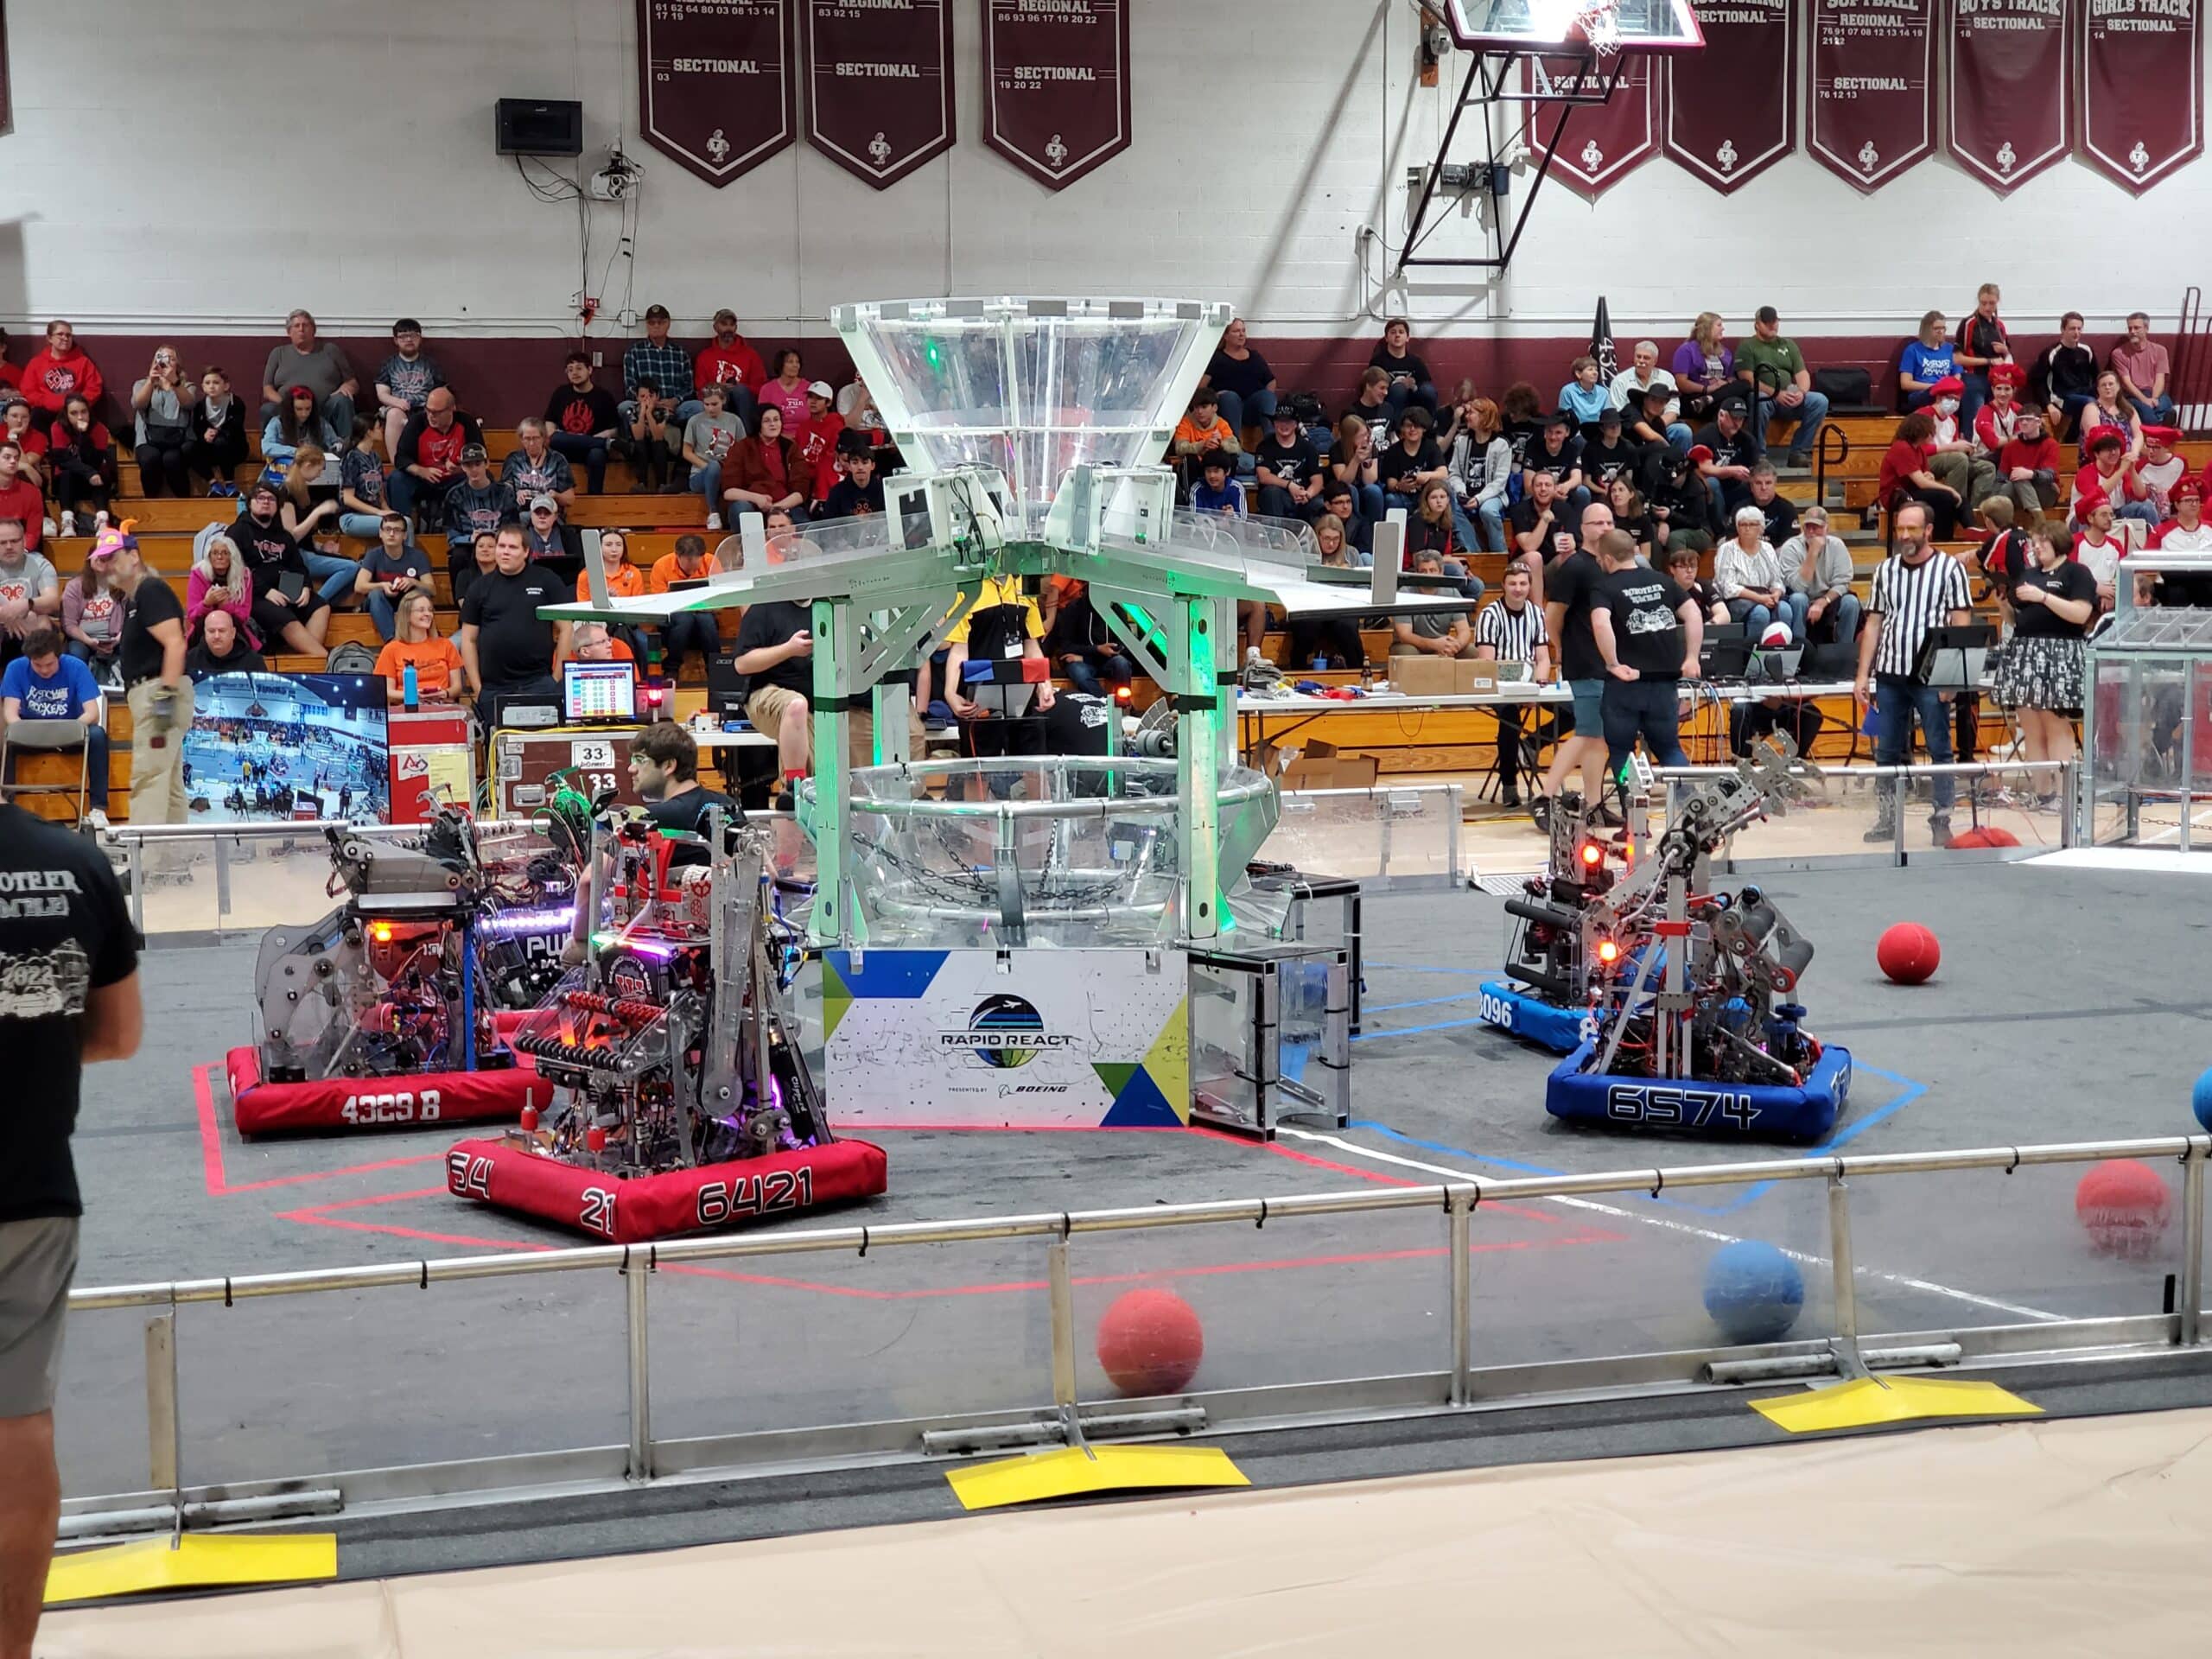 The Start of a Qualification Match